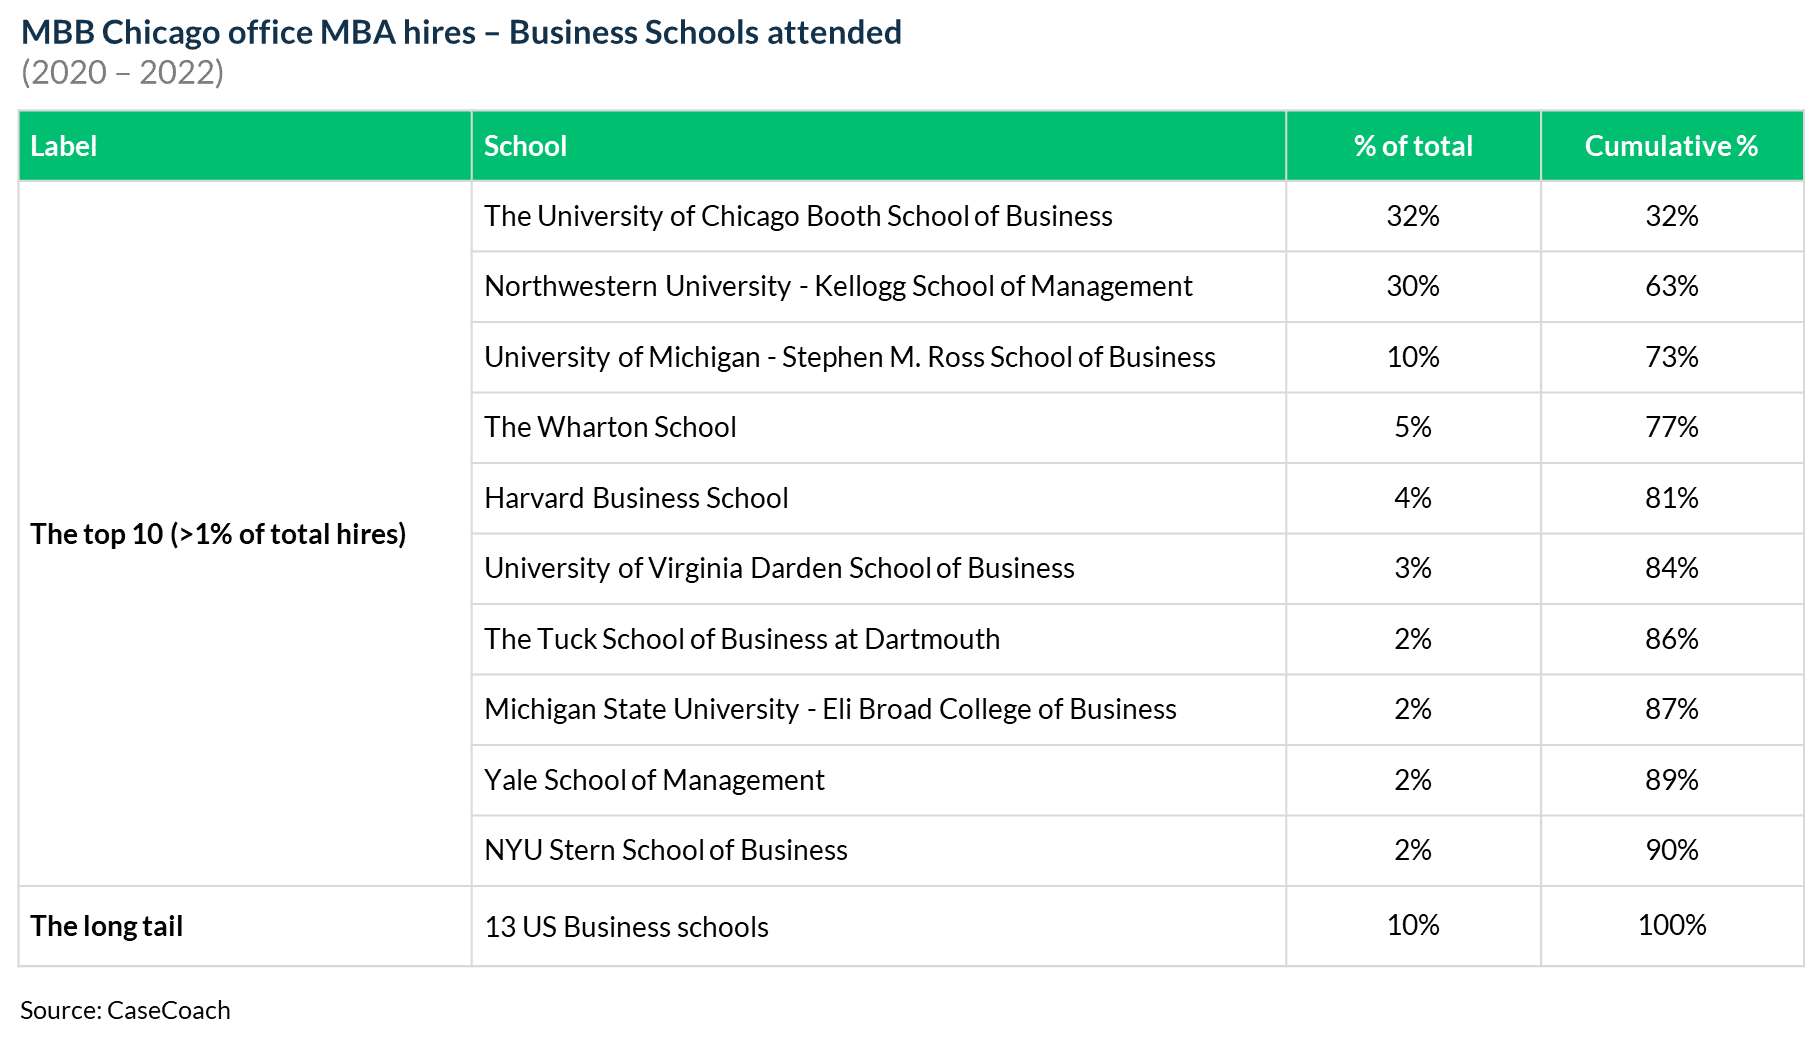 View of business schools attended by MBB Chicago office's MBA hires